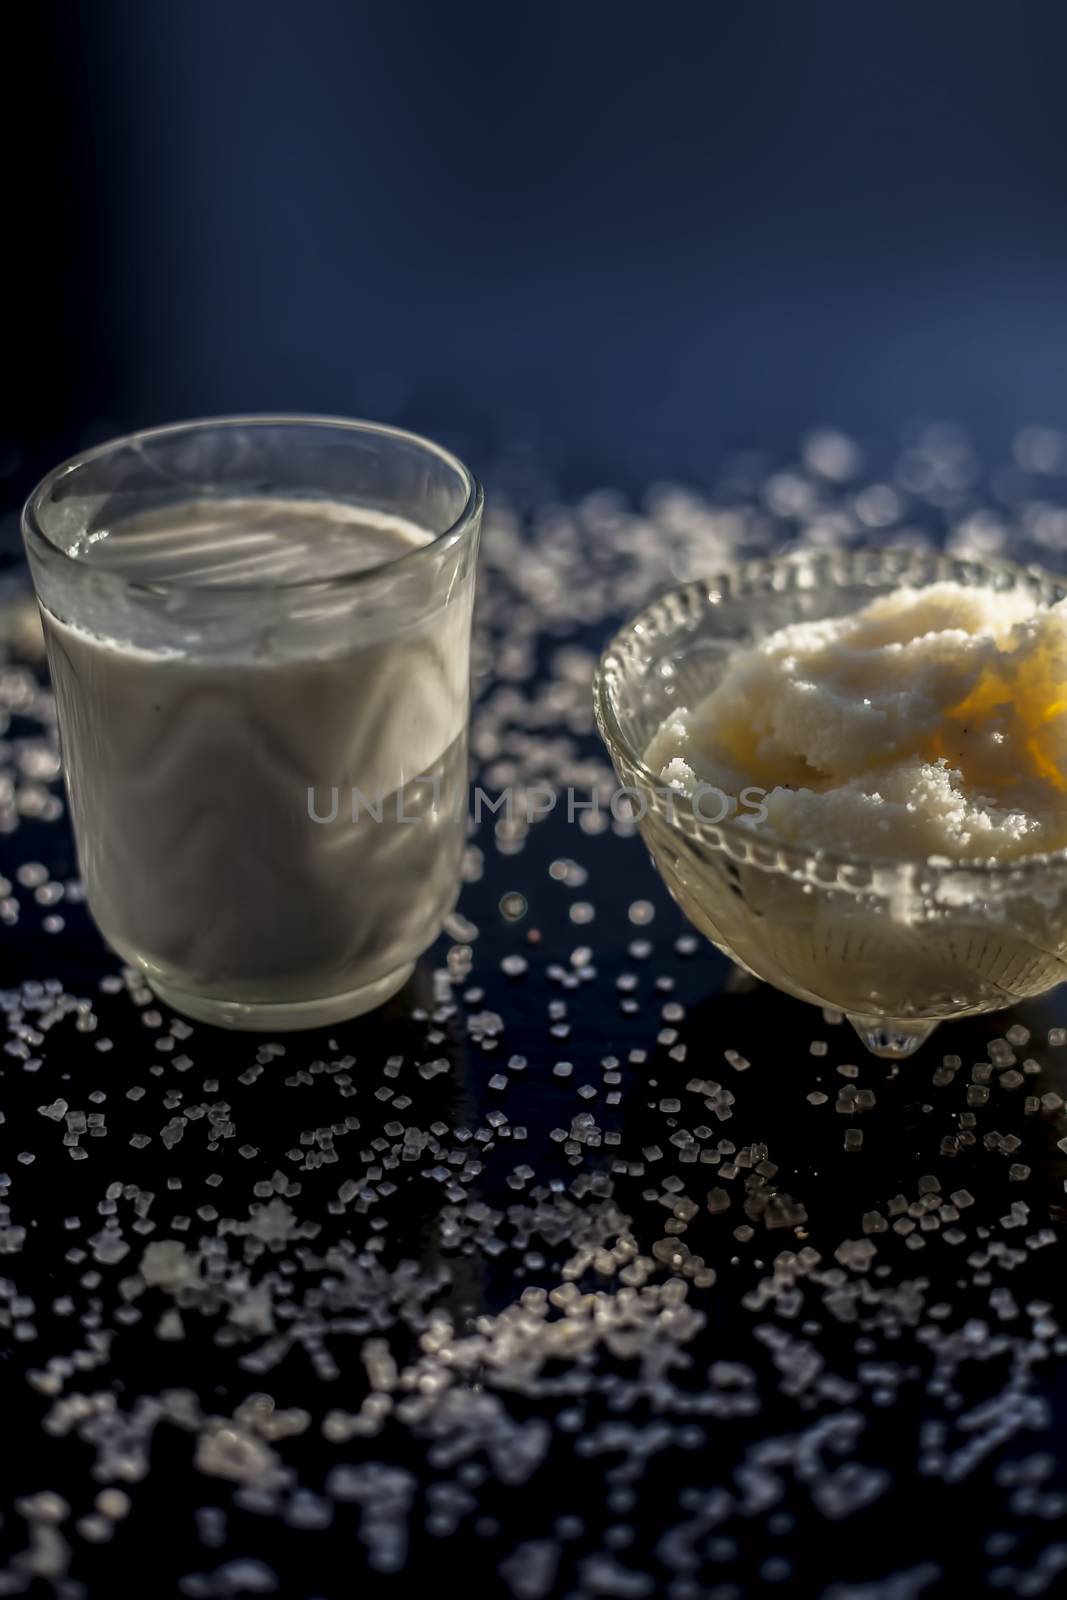 Close up of glass bowl of pure milk well mixed with hot milk in it on black wooden glossy surface along with raw ghee clarified butter and some sugar crystals spread on the surface. Vertical shot. by mirzamlk